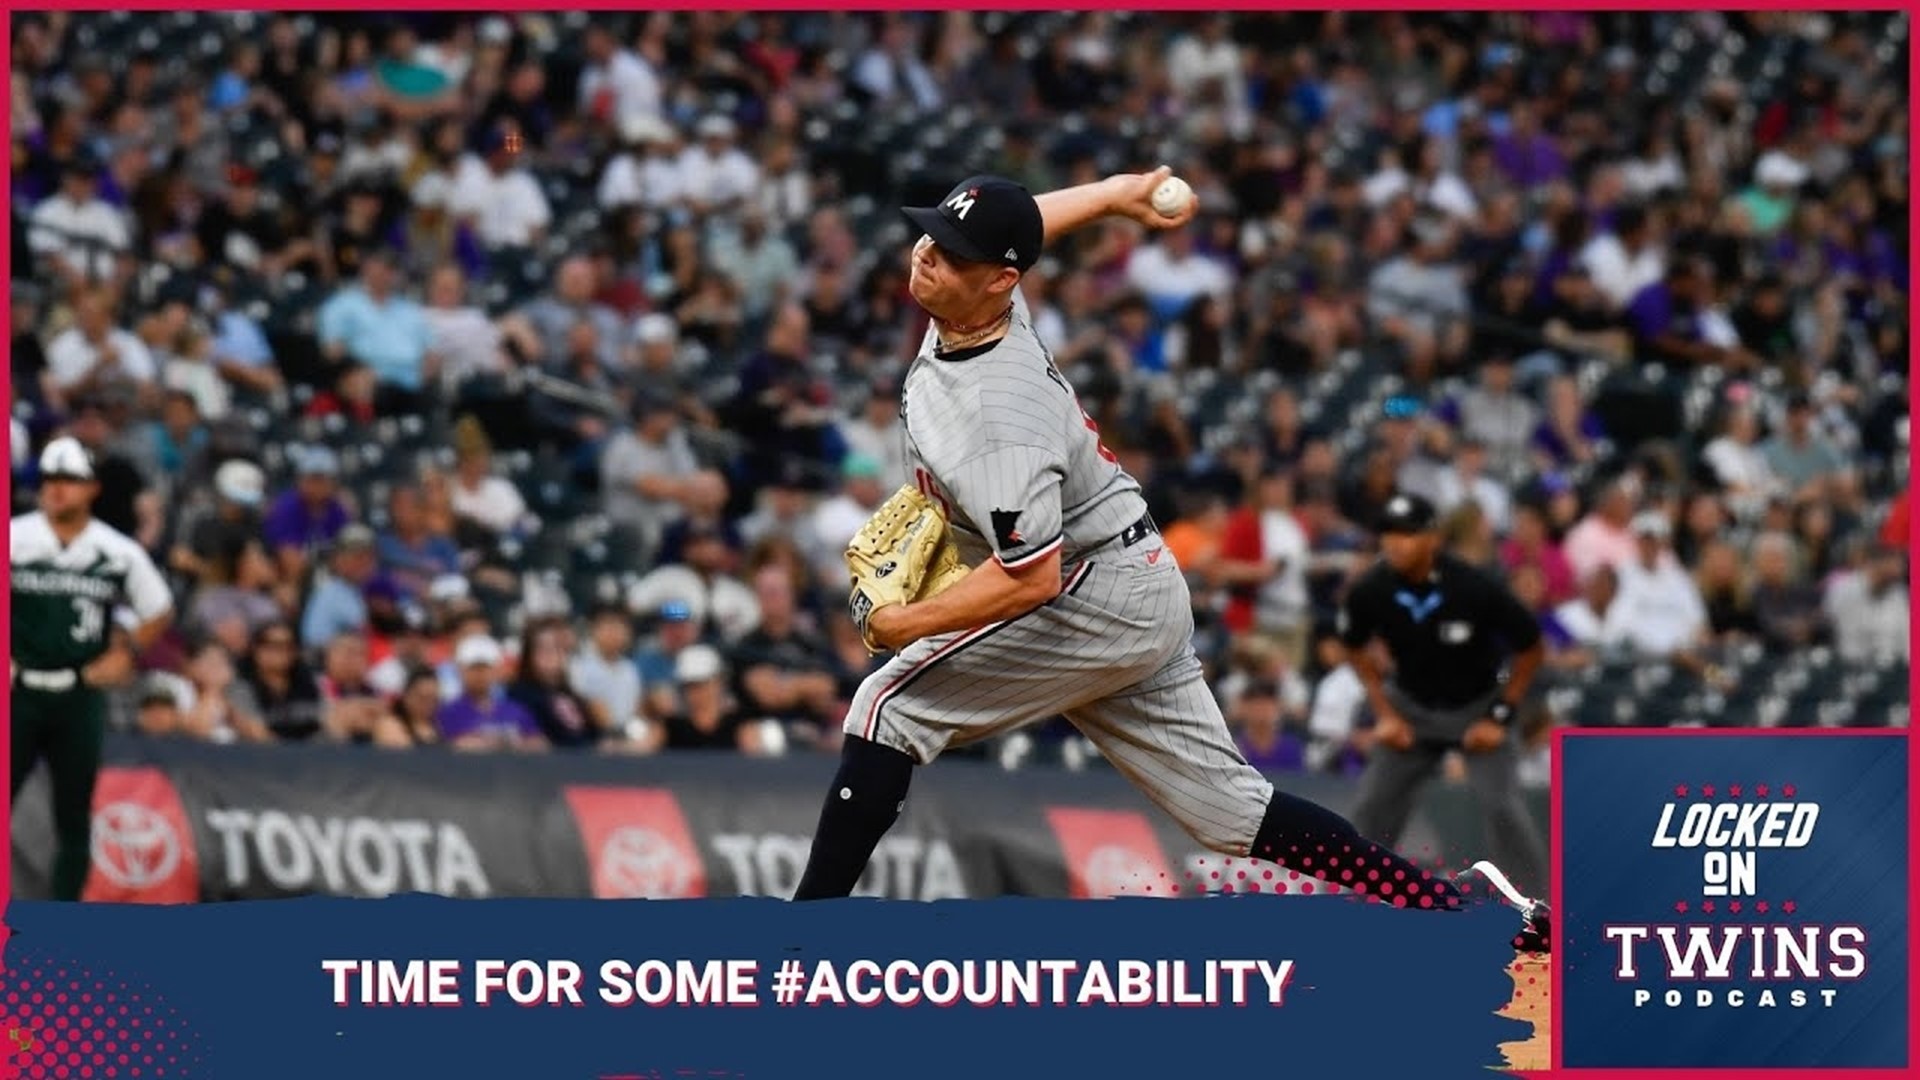 In this episode, Brandon takes #accountability for the 10 Bold Predictions he made back in March.